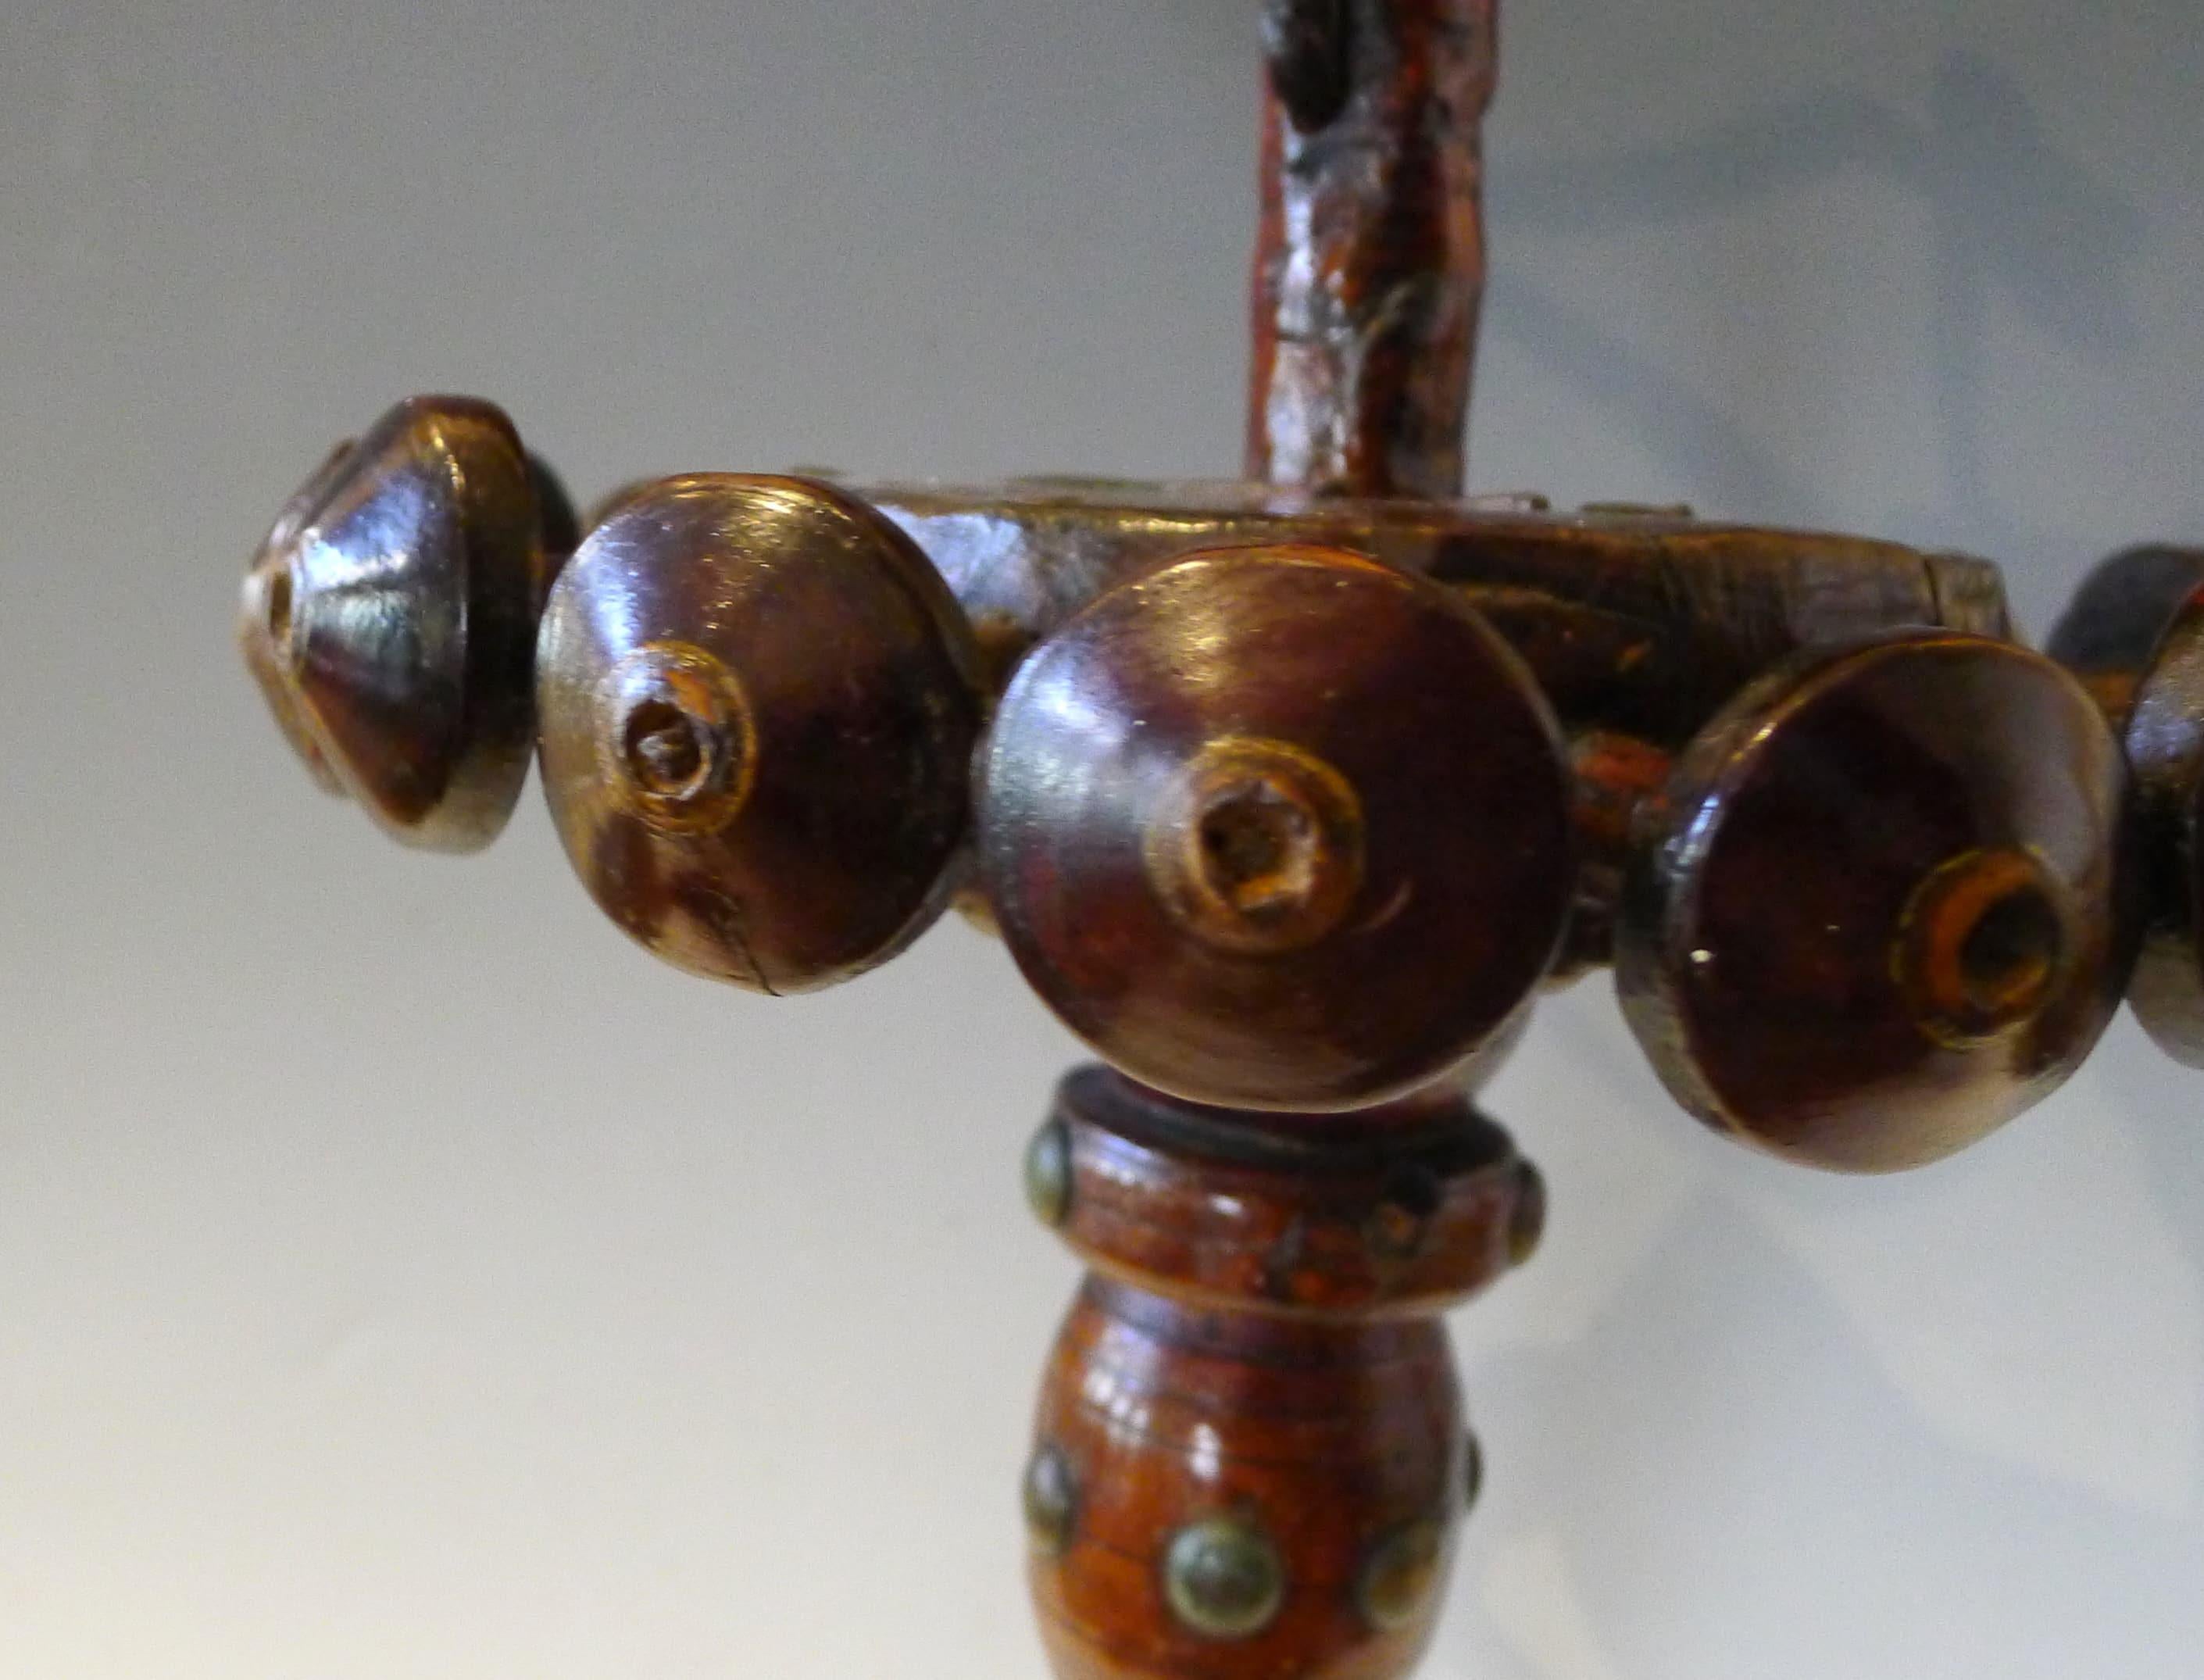 Spoon holder with circular plate brass nails
central axis in turned wood
usually hanged in a traditional French old kitchen
boxwood
France, Breton.